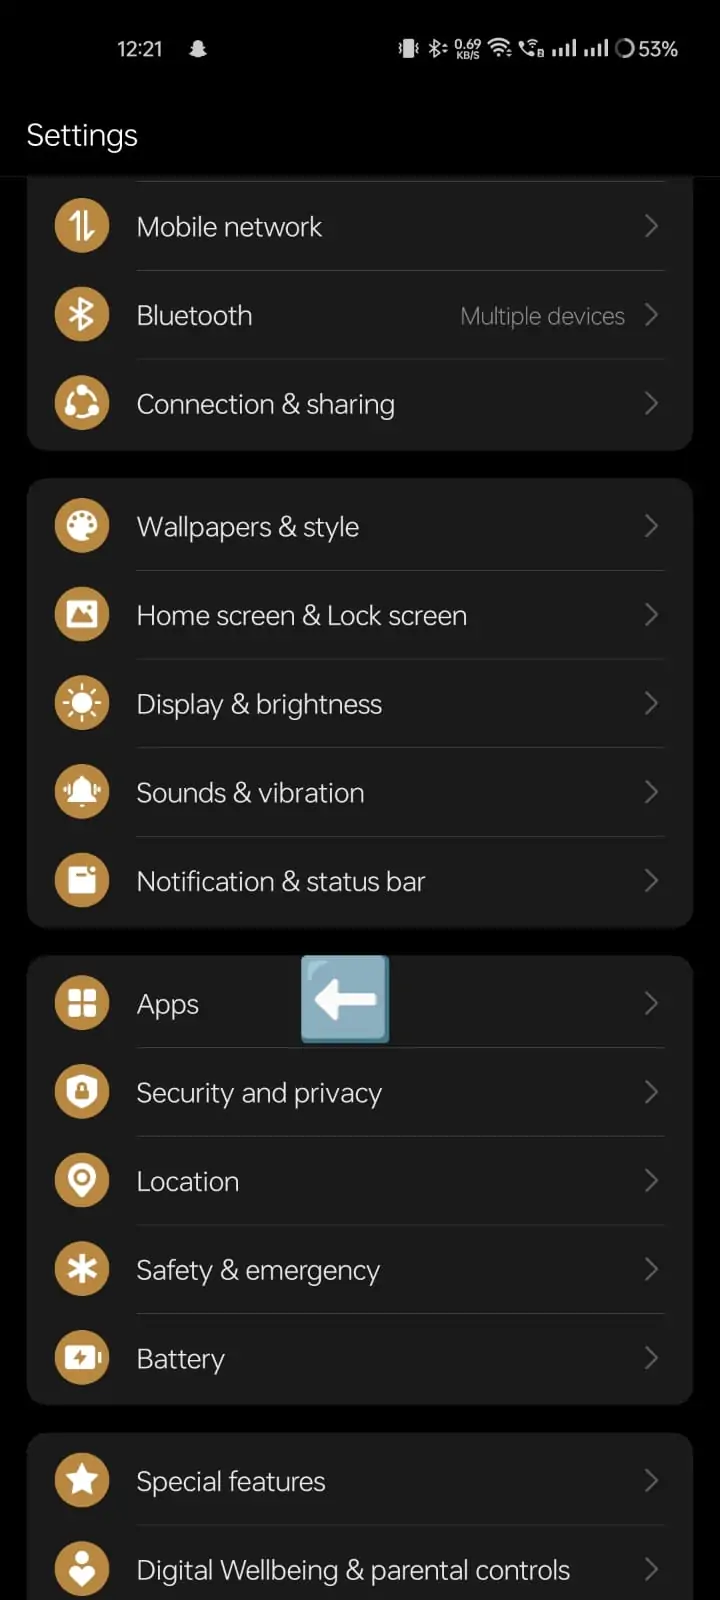 android settings app management to find hidden apps